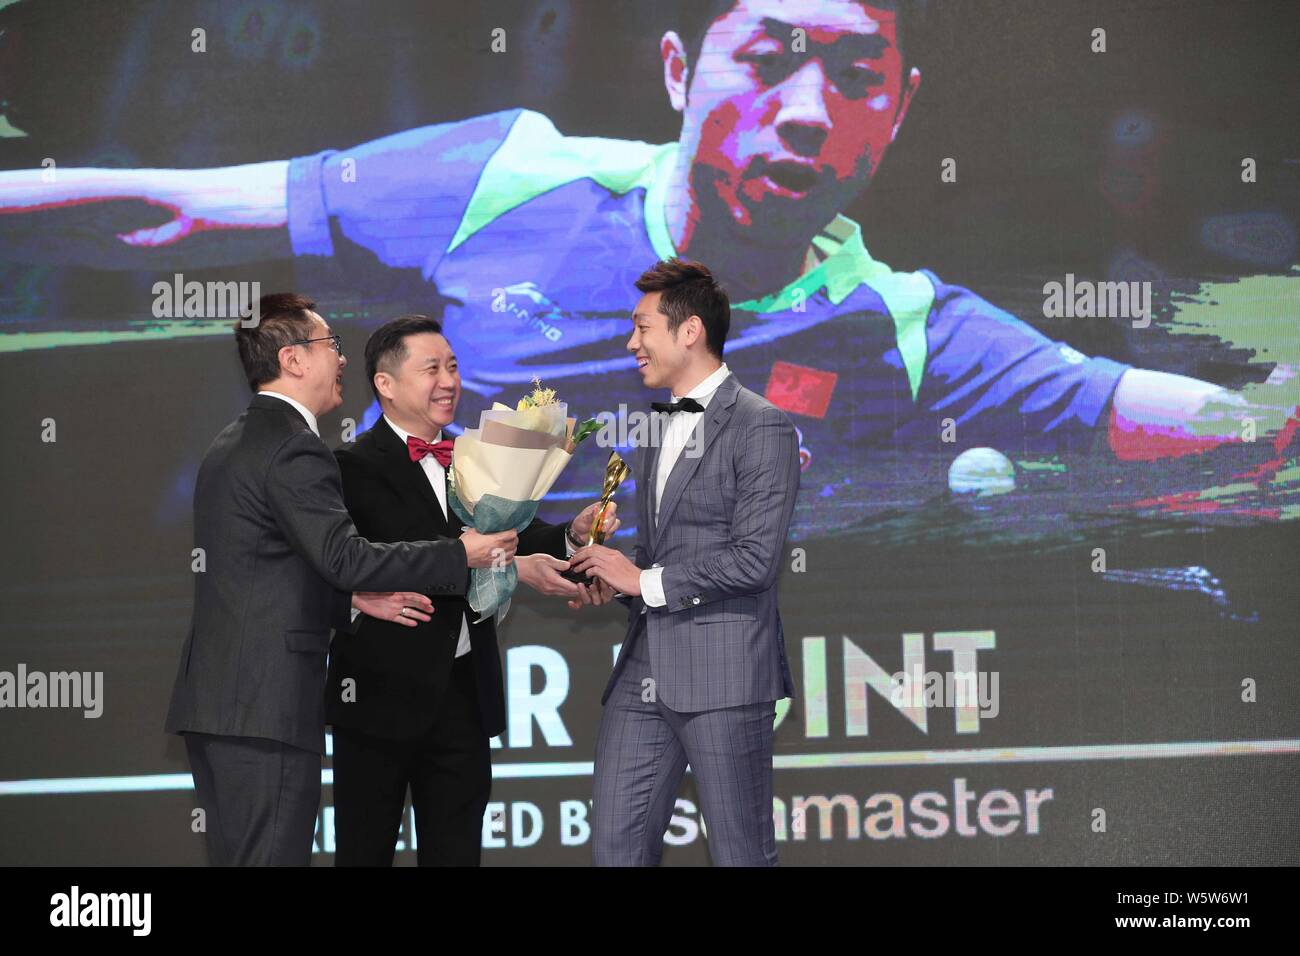 Chinese table tennis player Xu Xin, right, receives his 'Star Point Award' trophy during the Star Awards of the 2018 International Table Tennis Federa Stock Photo